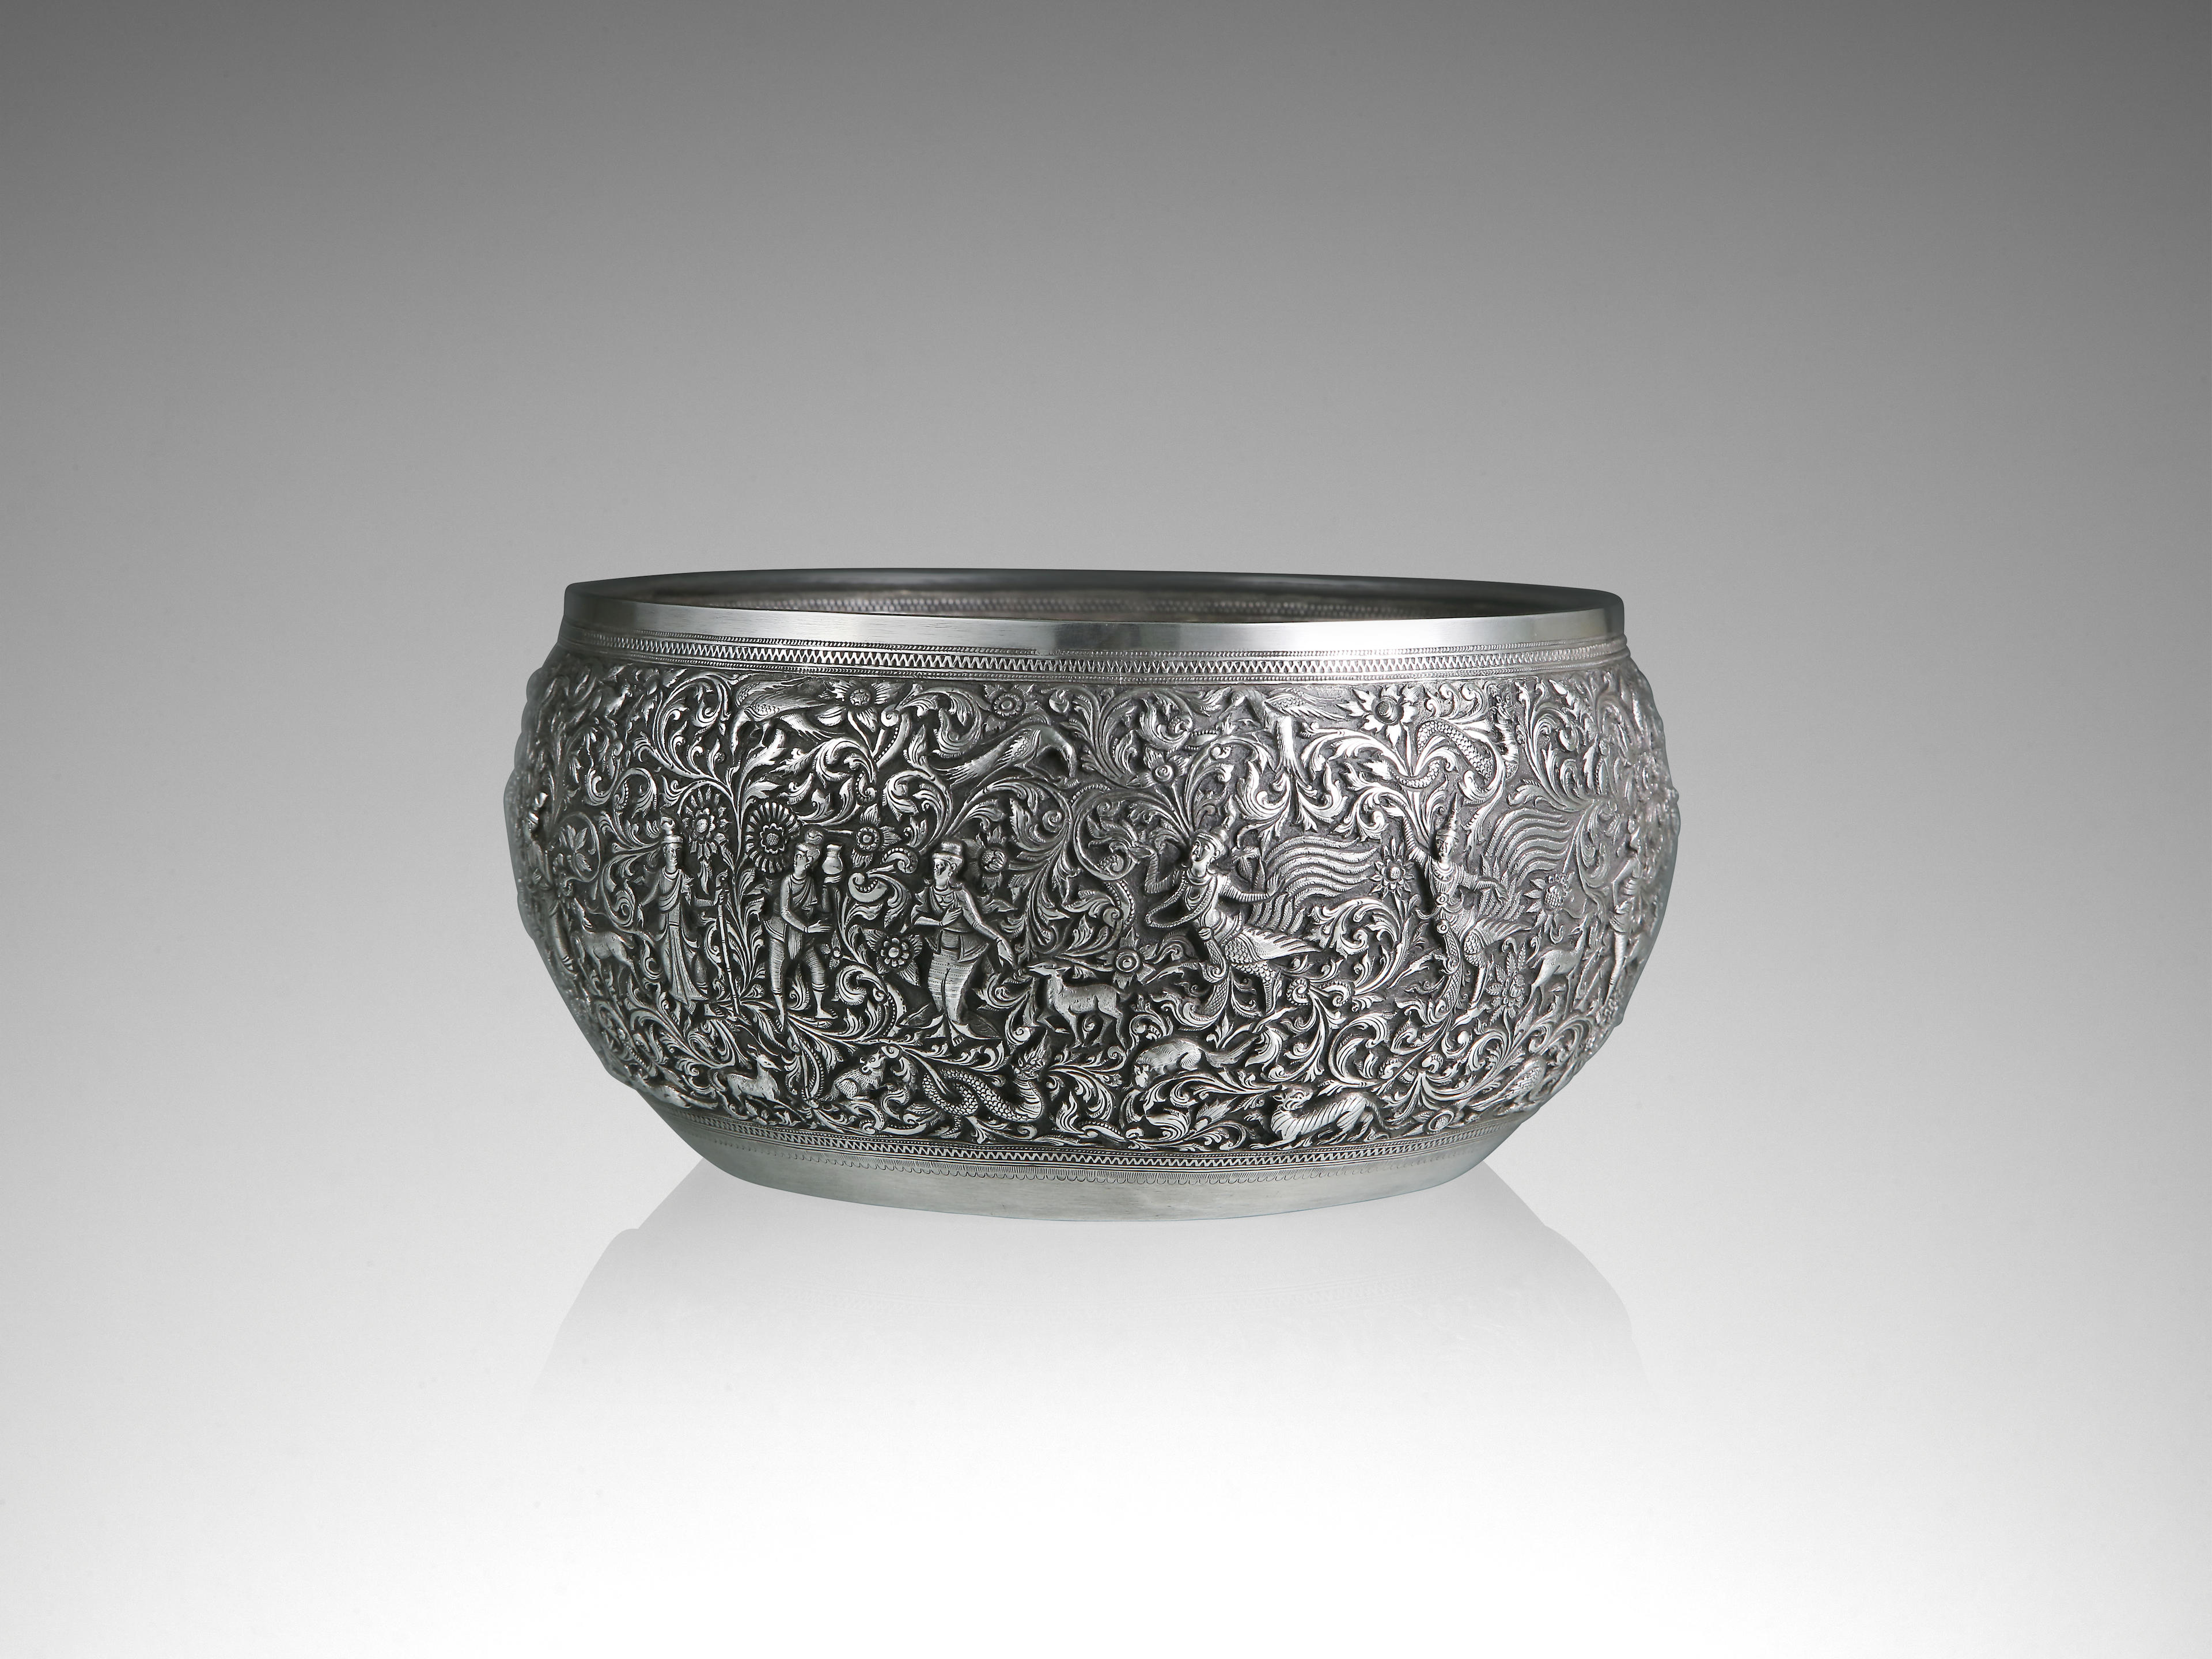 A SILVER OFFERING BOWL BURMA (MYANMAR), SHAN STATE, 1921